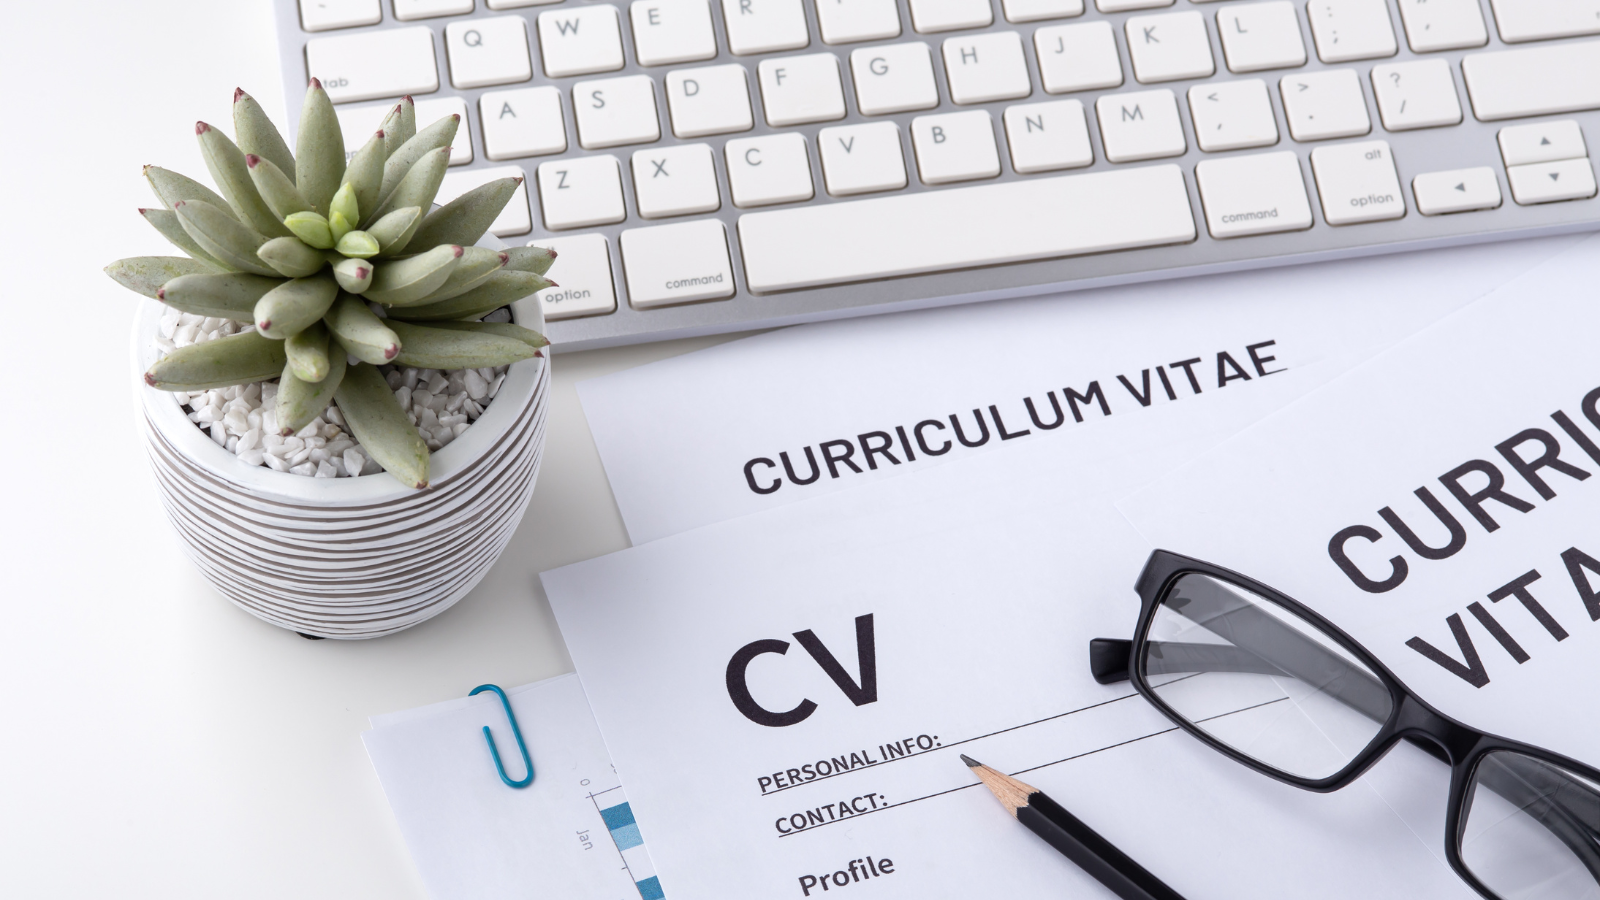 Picture of printed CV next to keyboard with pencil and glasses.